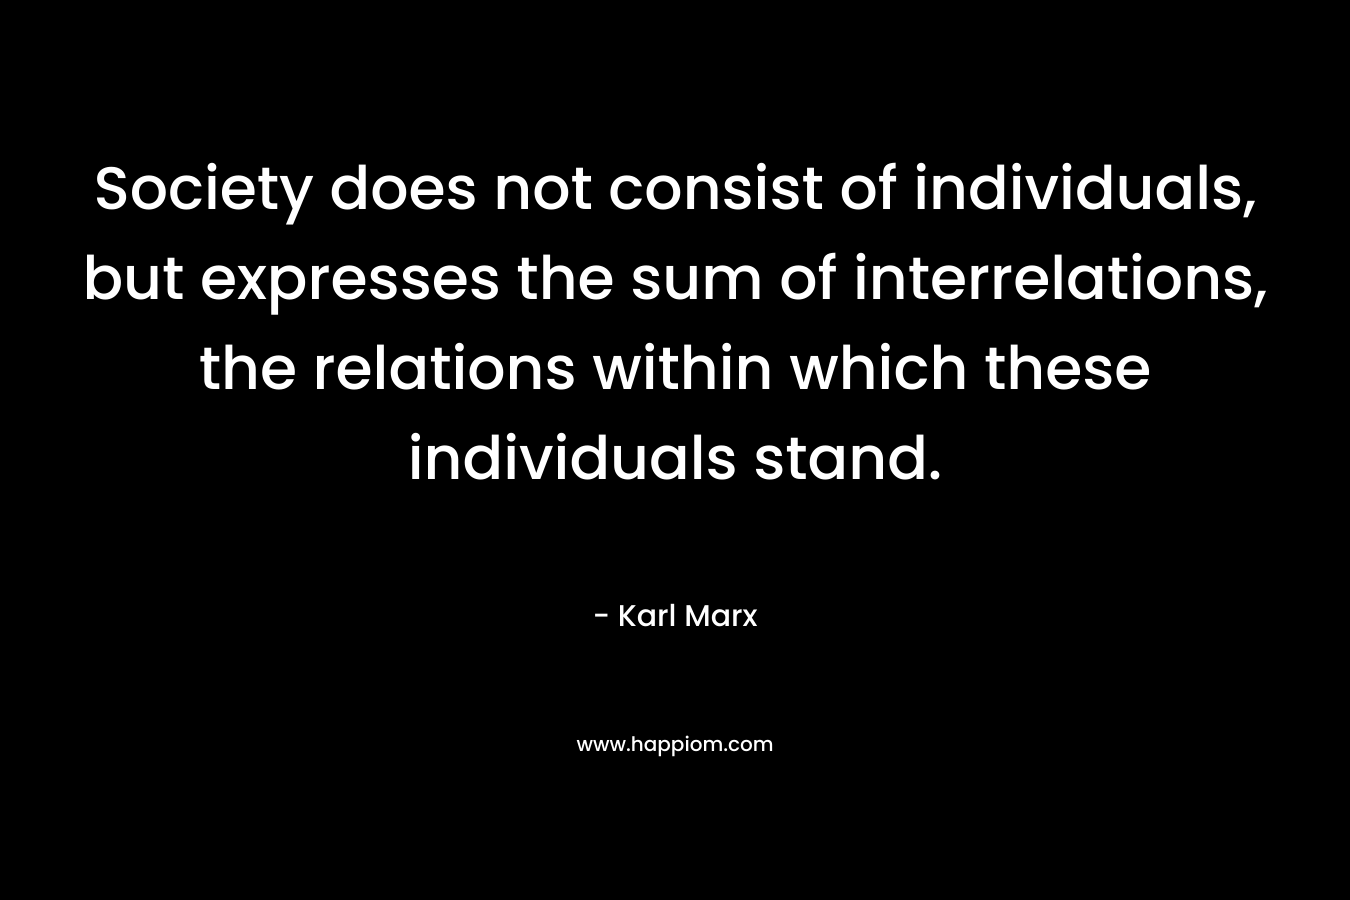 Society does not consist of individuals, but expresses the sum of interrelations, the relations within which these individuals stand.